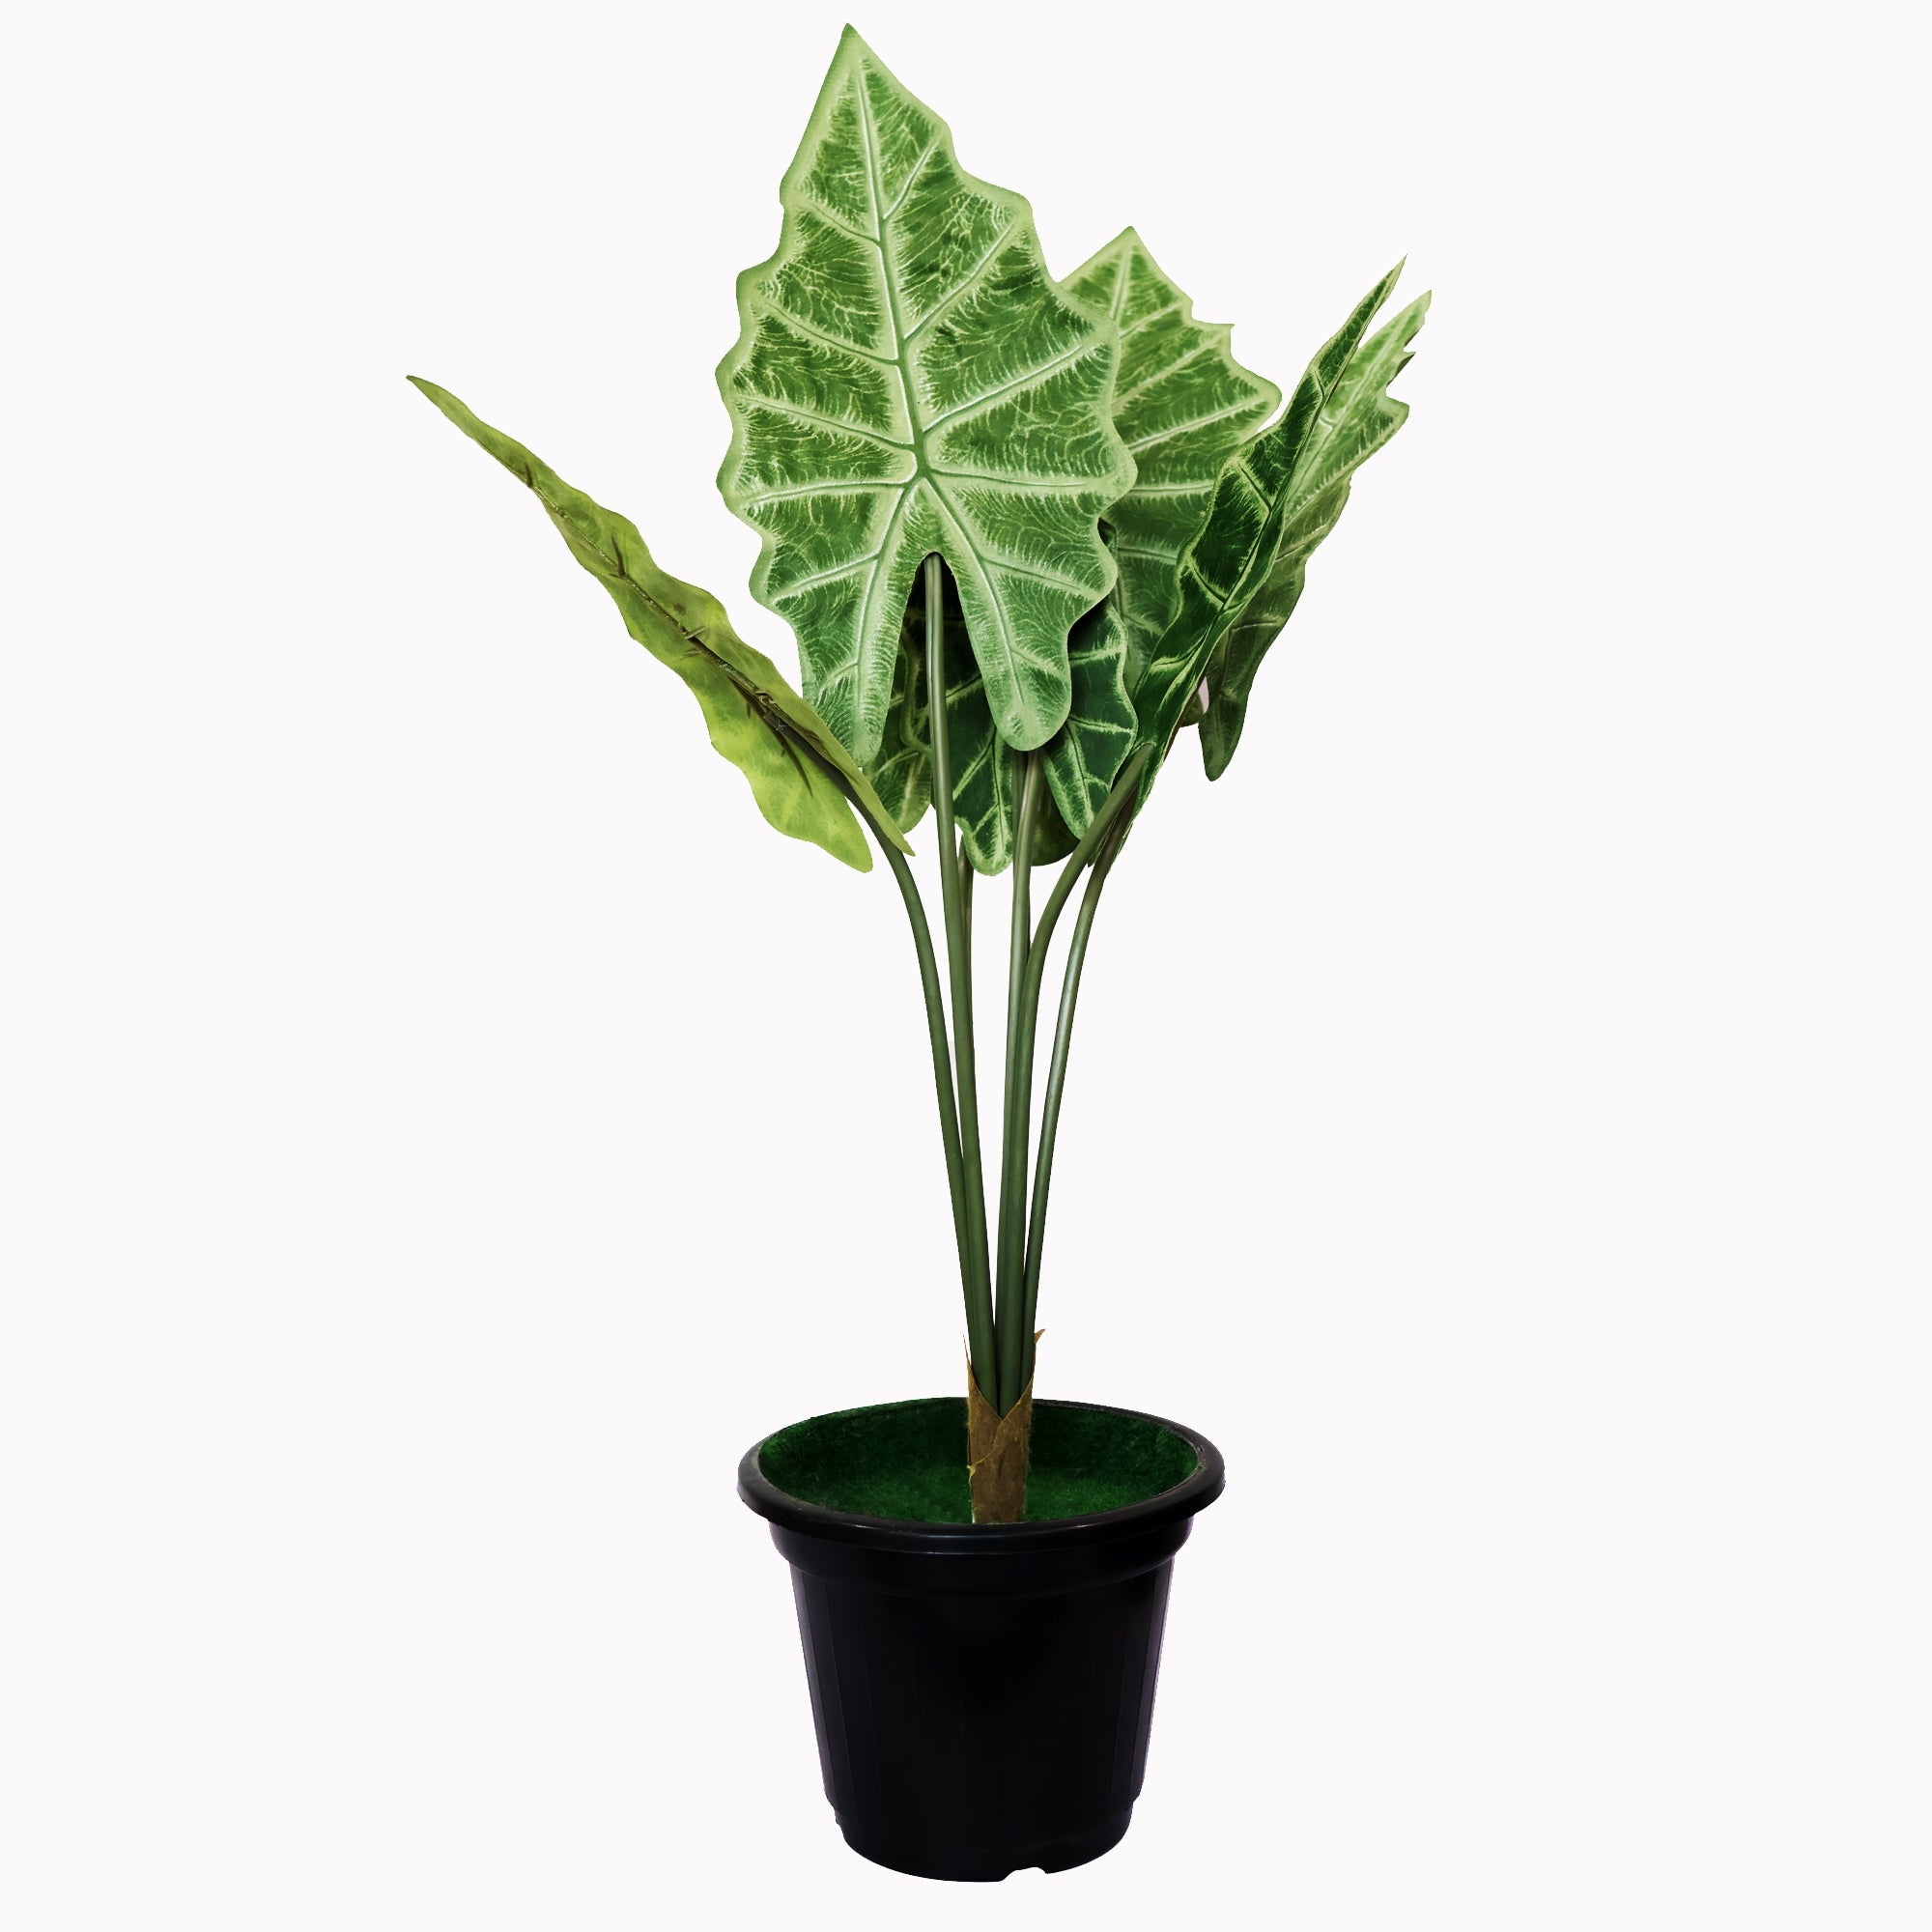 AAVANA GREENS 24" Fake Alocasia Amazonica Tropical Safari Jungle Leaves Artificial Plants for Home & Office Decor Indoor African Mask Plant with Plastic Pot, Black, Medium